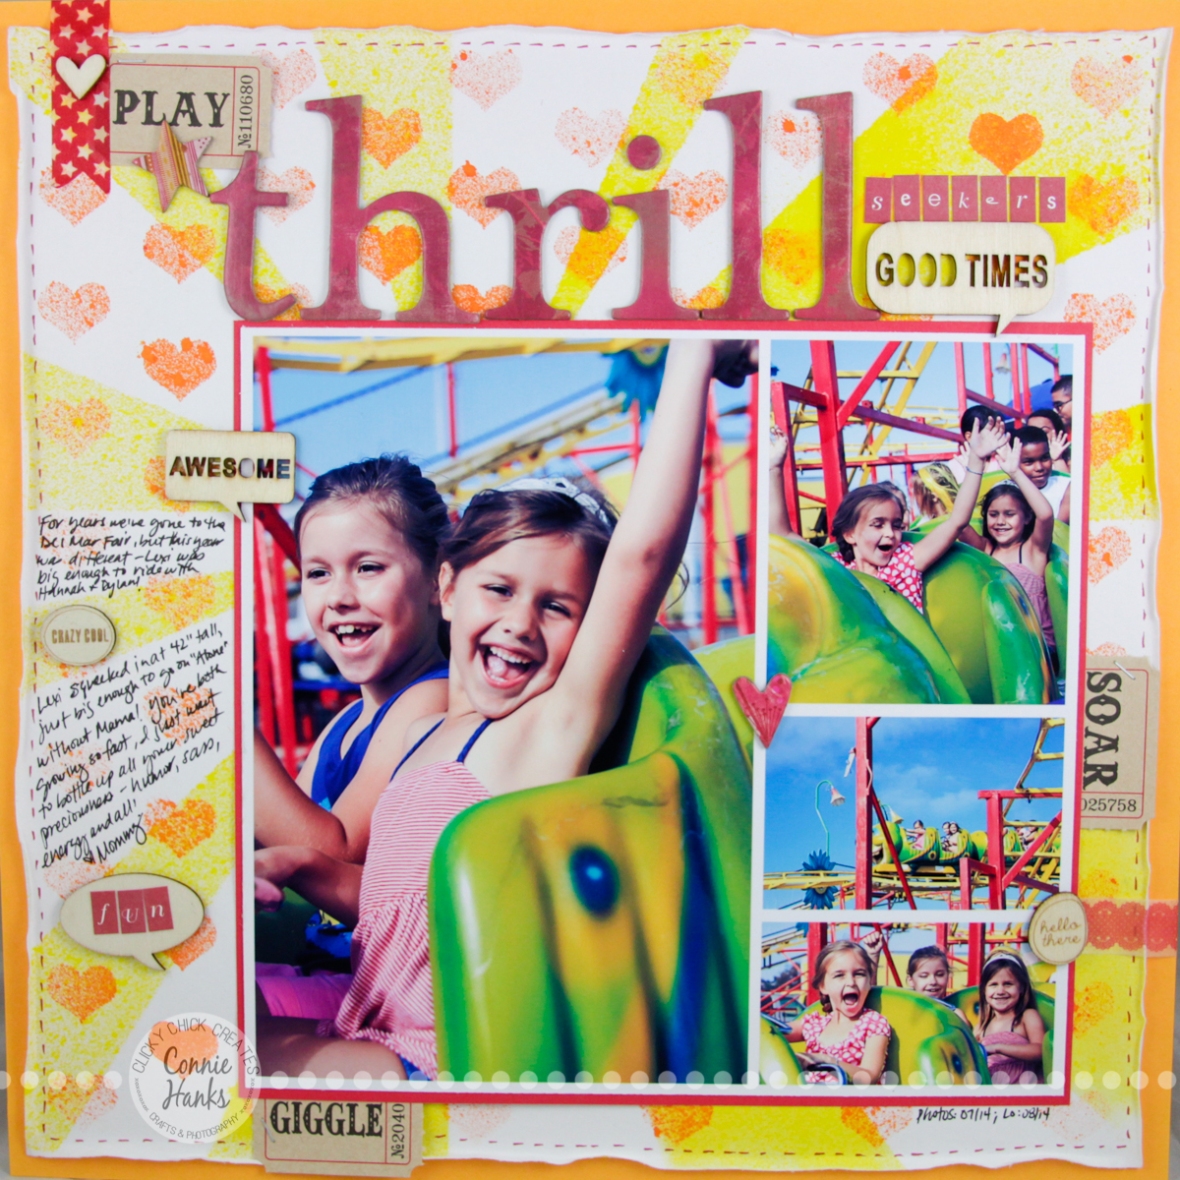 Connie Hanks Photography // ClickyChickCreates.com // "Thrill Seekers" scrapbook layout - an afternoon at the county fair!